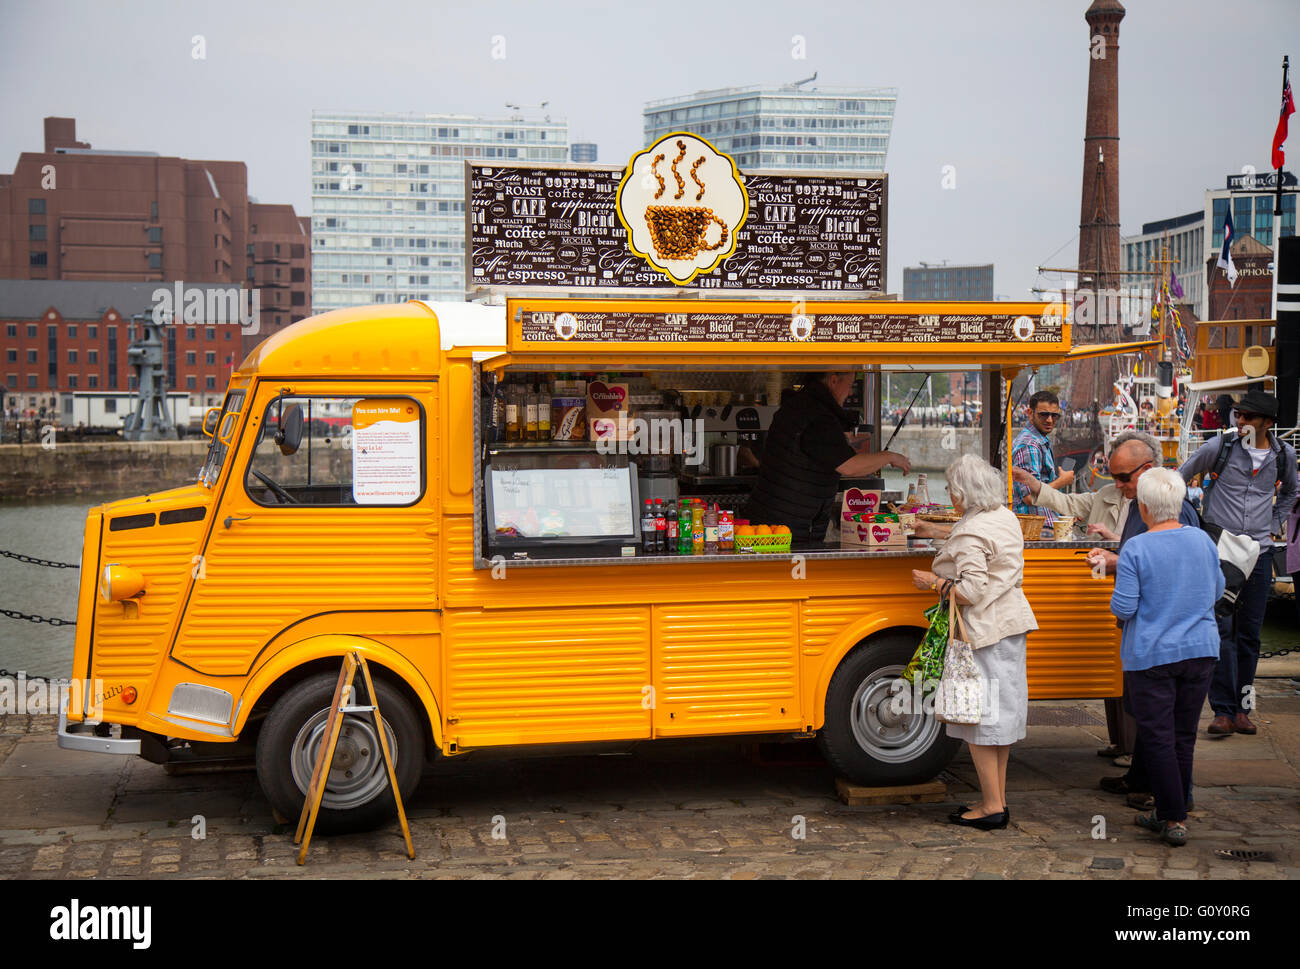 Queue outside Classic yellow Citroen 'H' ice cream, coffee carts, coffee vans, catering van. A french vehicle, food truck converted to selling foods and drinks, Liverpool, Merseyside, UK Stock Photo